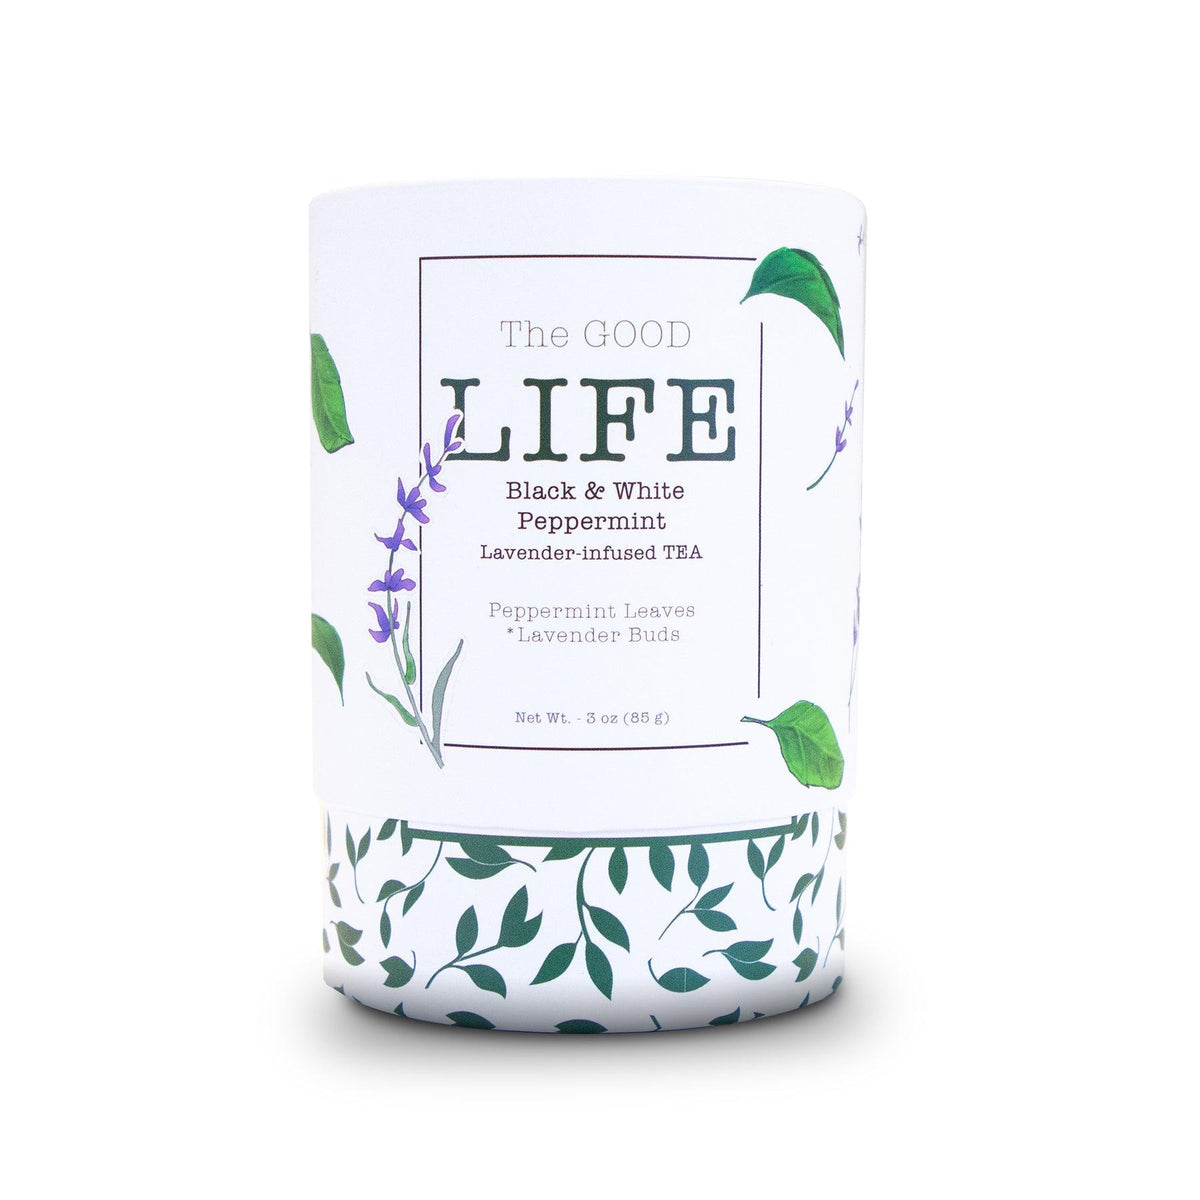 The GOOD LIFE Black & White Peppermint Lavender-Infused TEA - Lavender Life Company